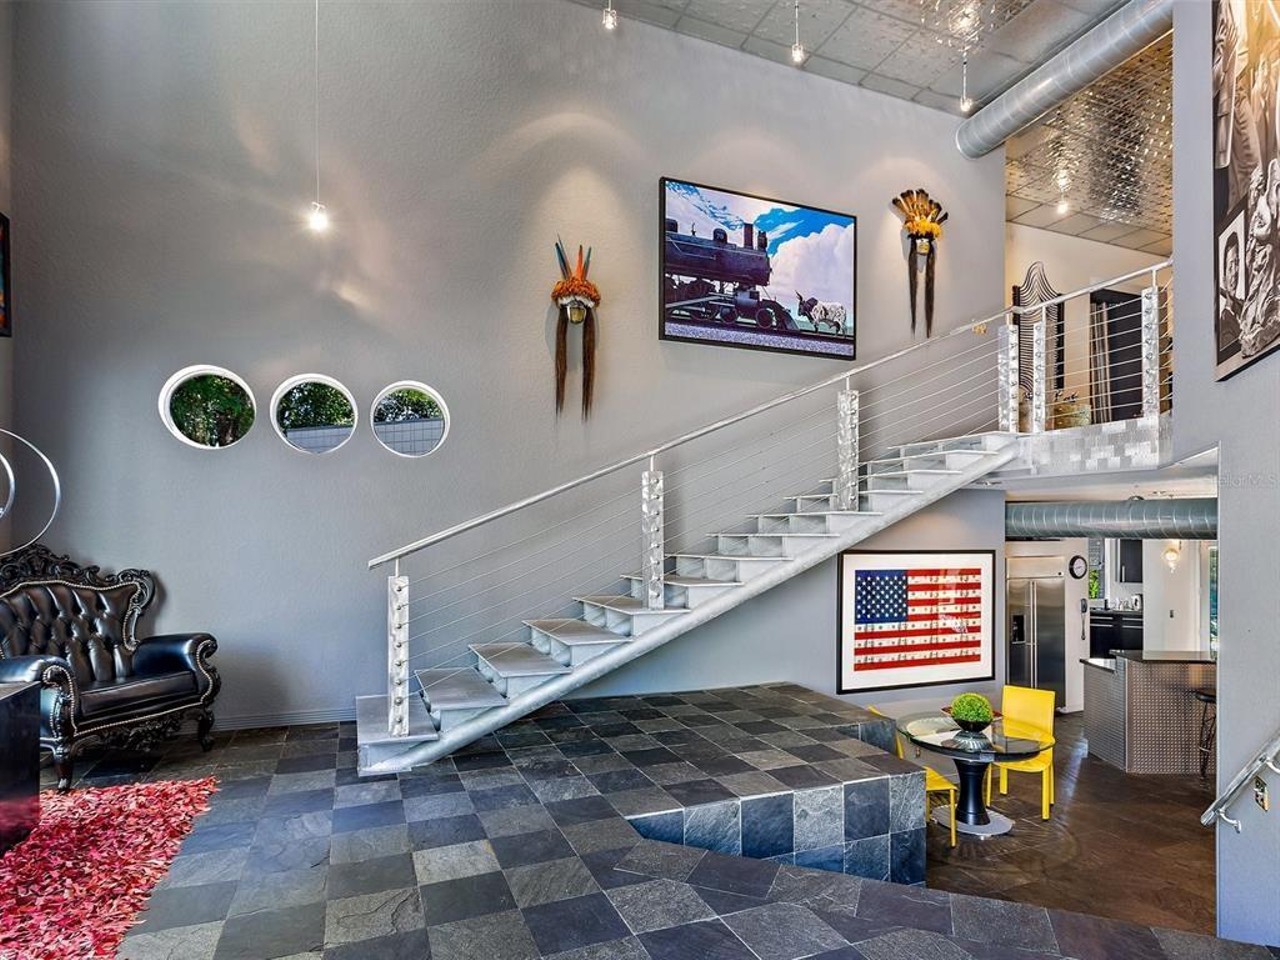 This metallic Florida mansion is built for the zombie apocalypse